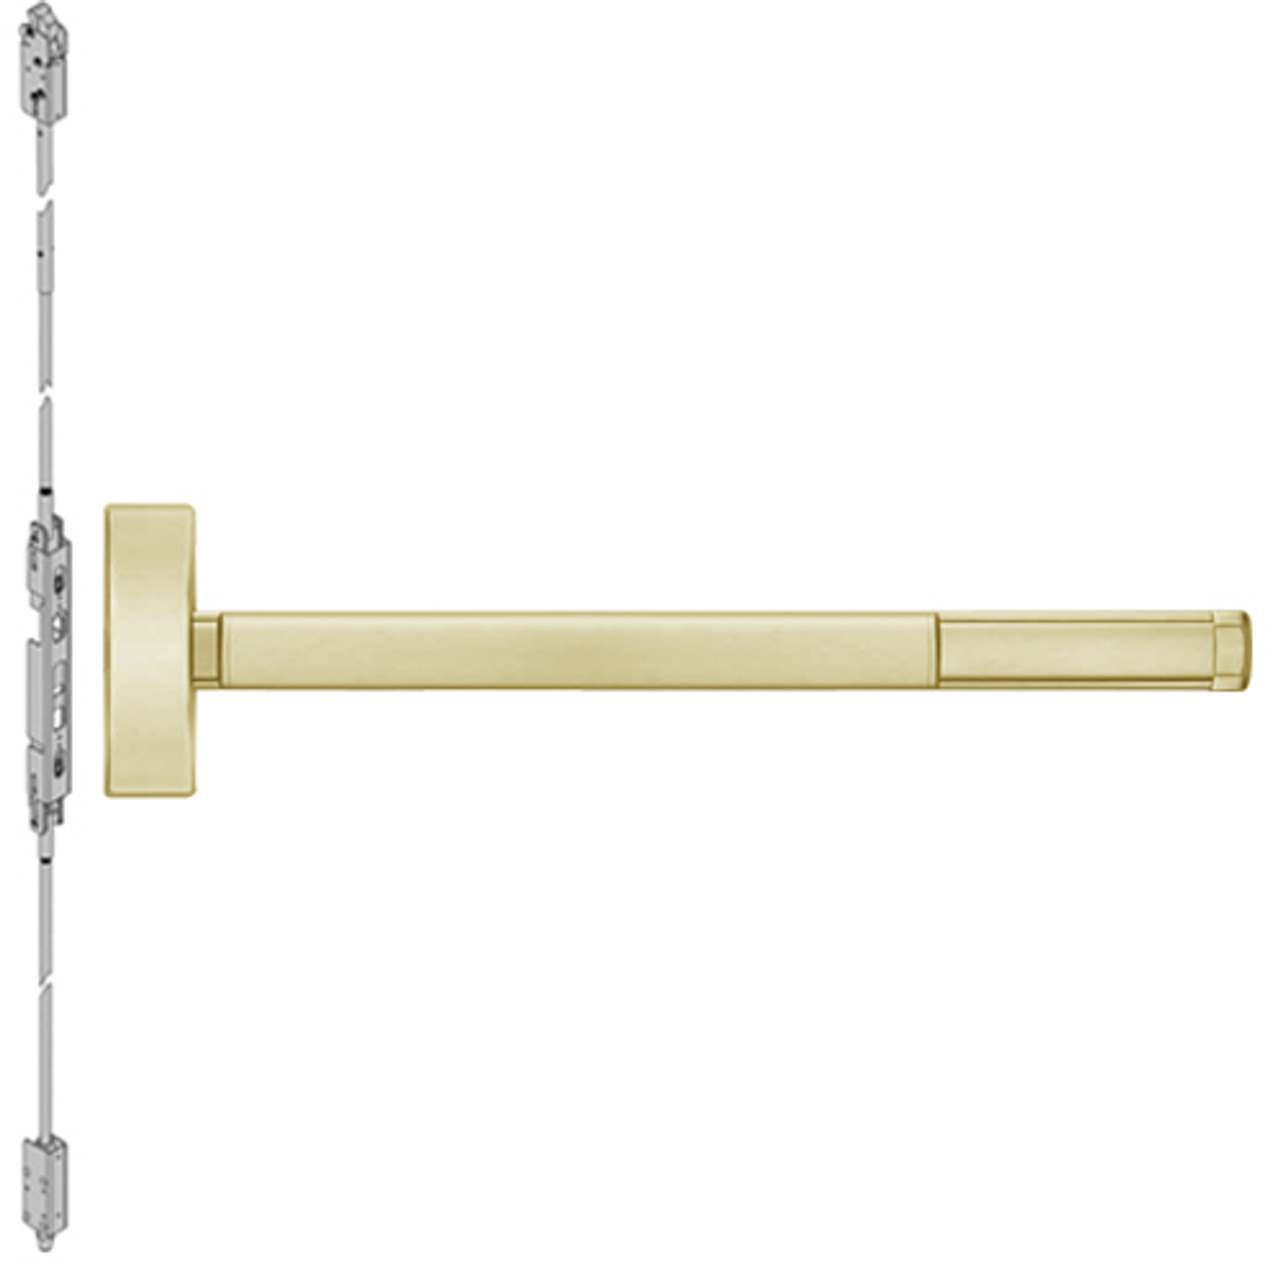 TSFL2805LBR-606-48 PHI 2800 Series Fire Rated Concealed Vertical Rod Exit Device with Touchbar Monitoring Switch Prepped for Key Controls Thumb Piece in Satin Brass Finish